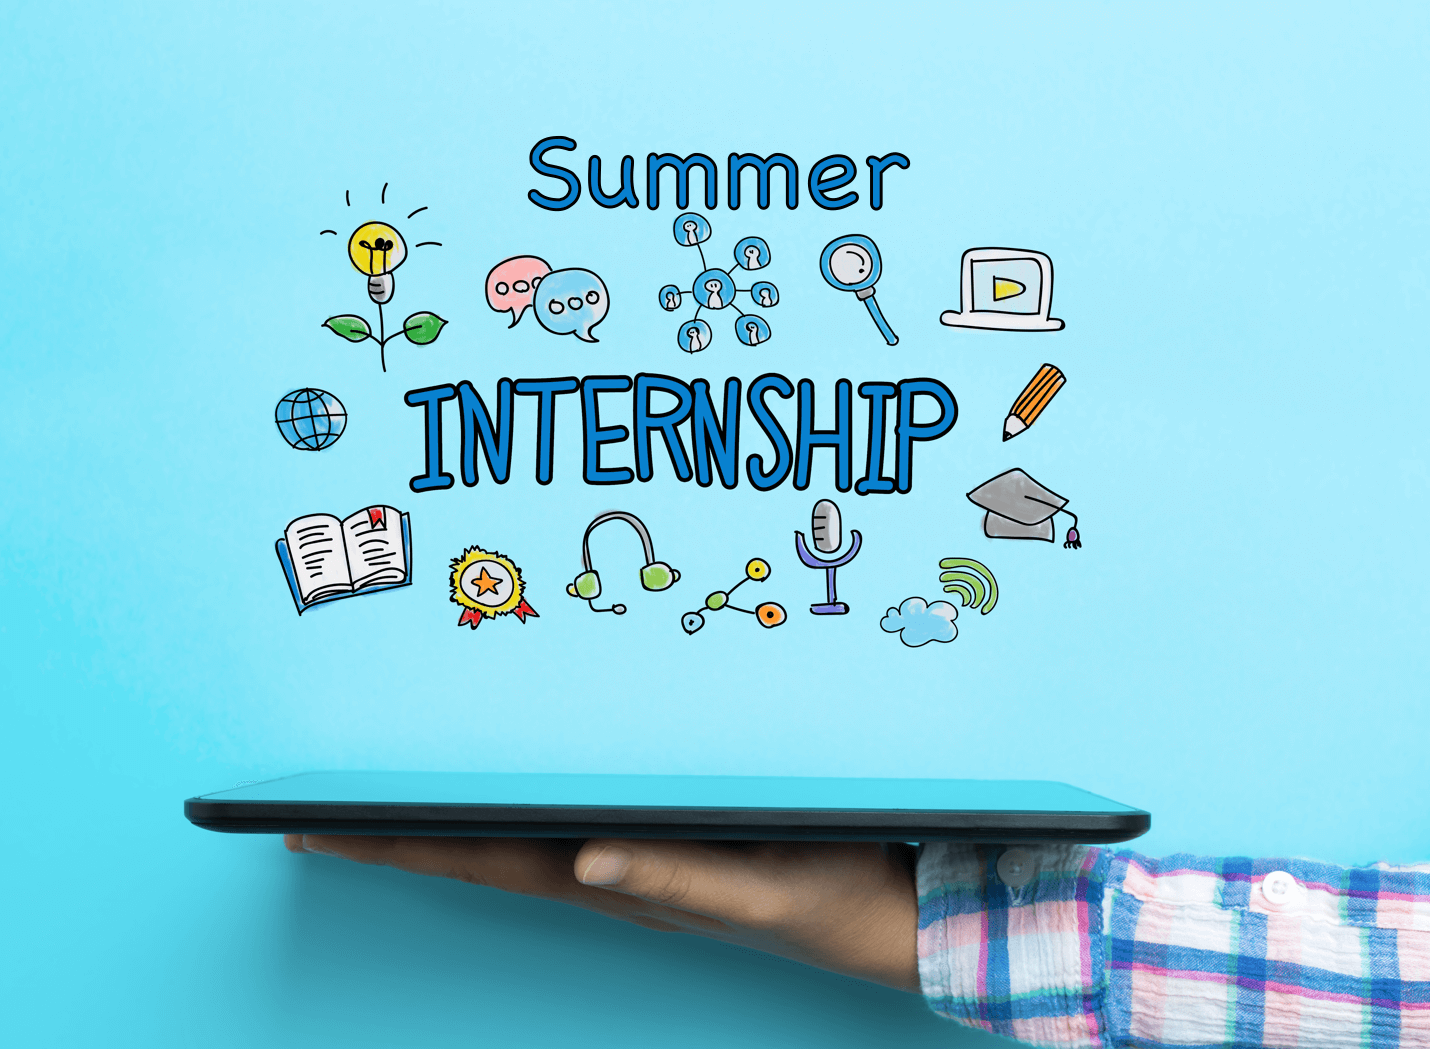 How to apply for summer interns?